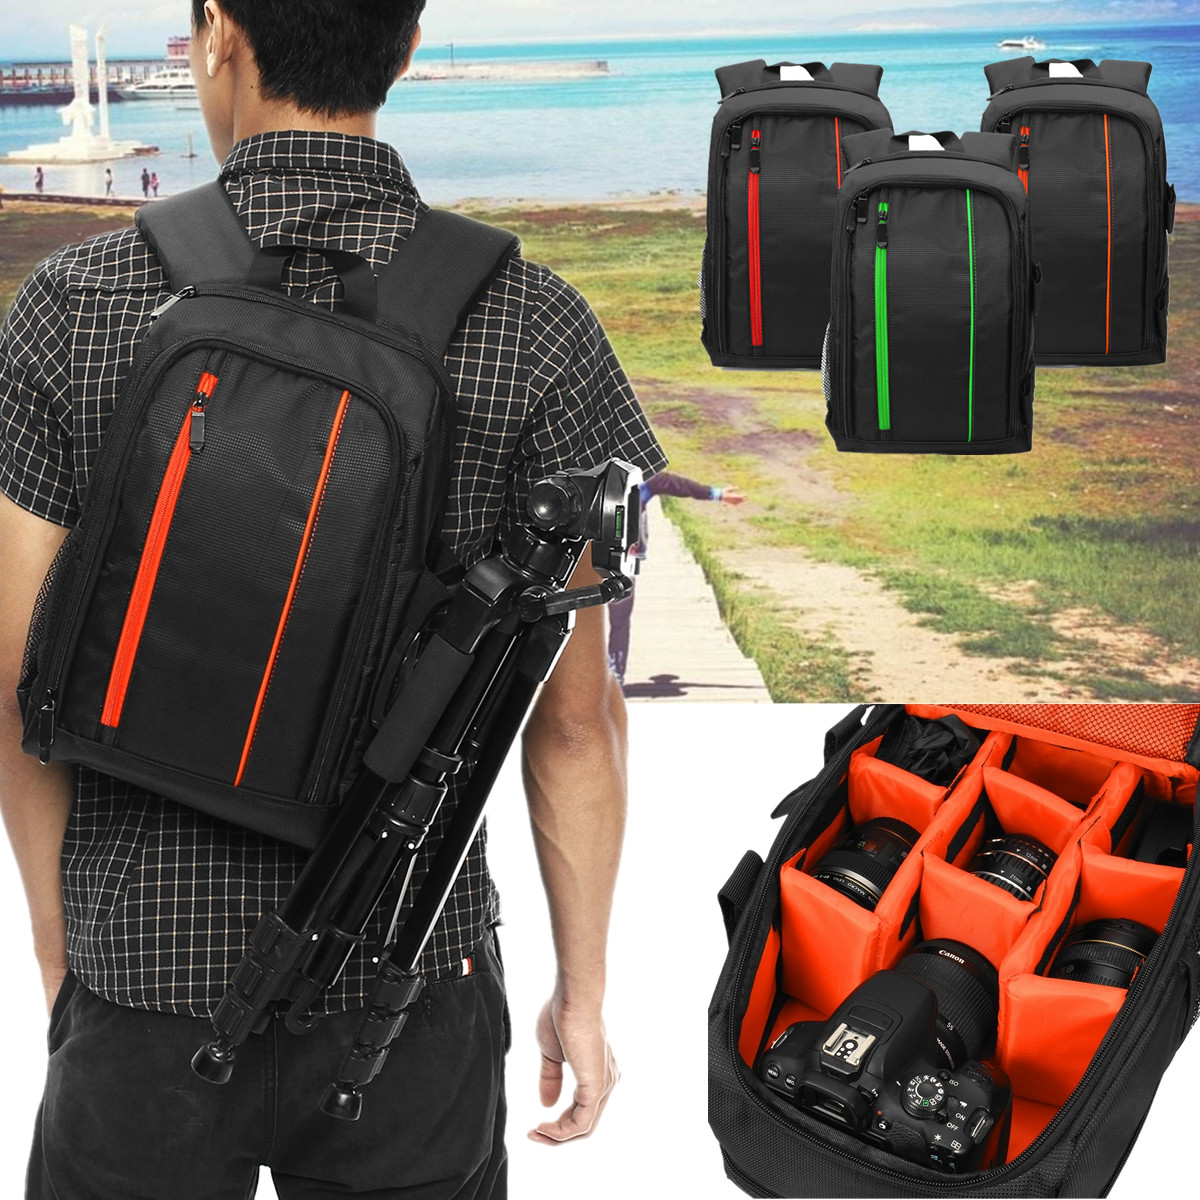 Waterproof Camera Backpack Travel DSLR Bag W/ Rain Cover For Canon Sony 9